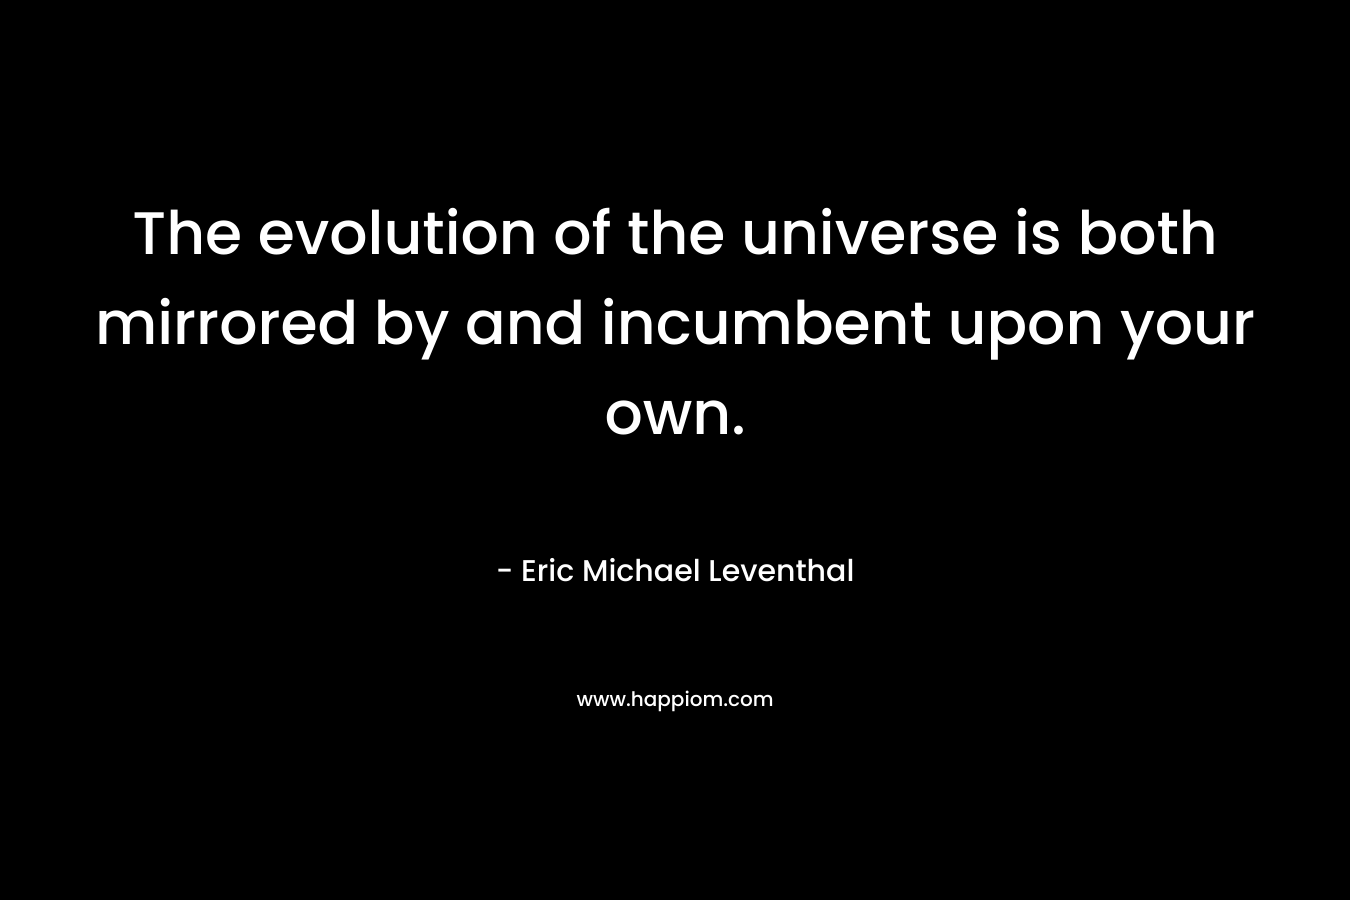 The evolution of the universe is both mirrored by and incumbent upon your own.